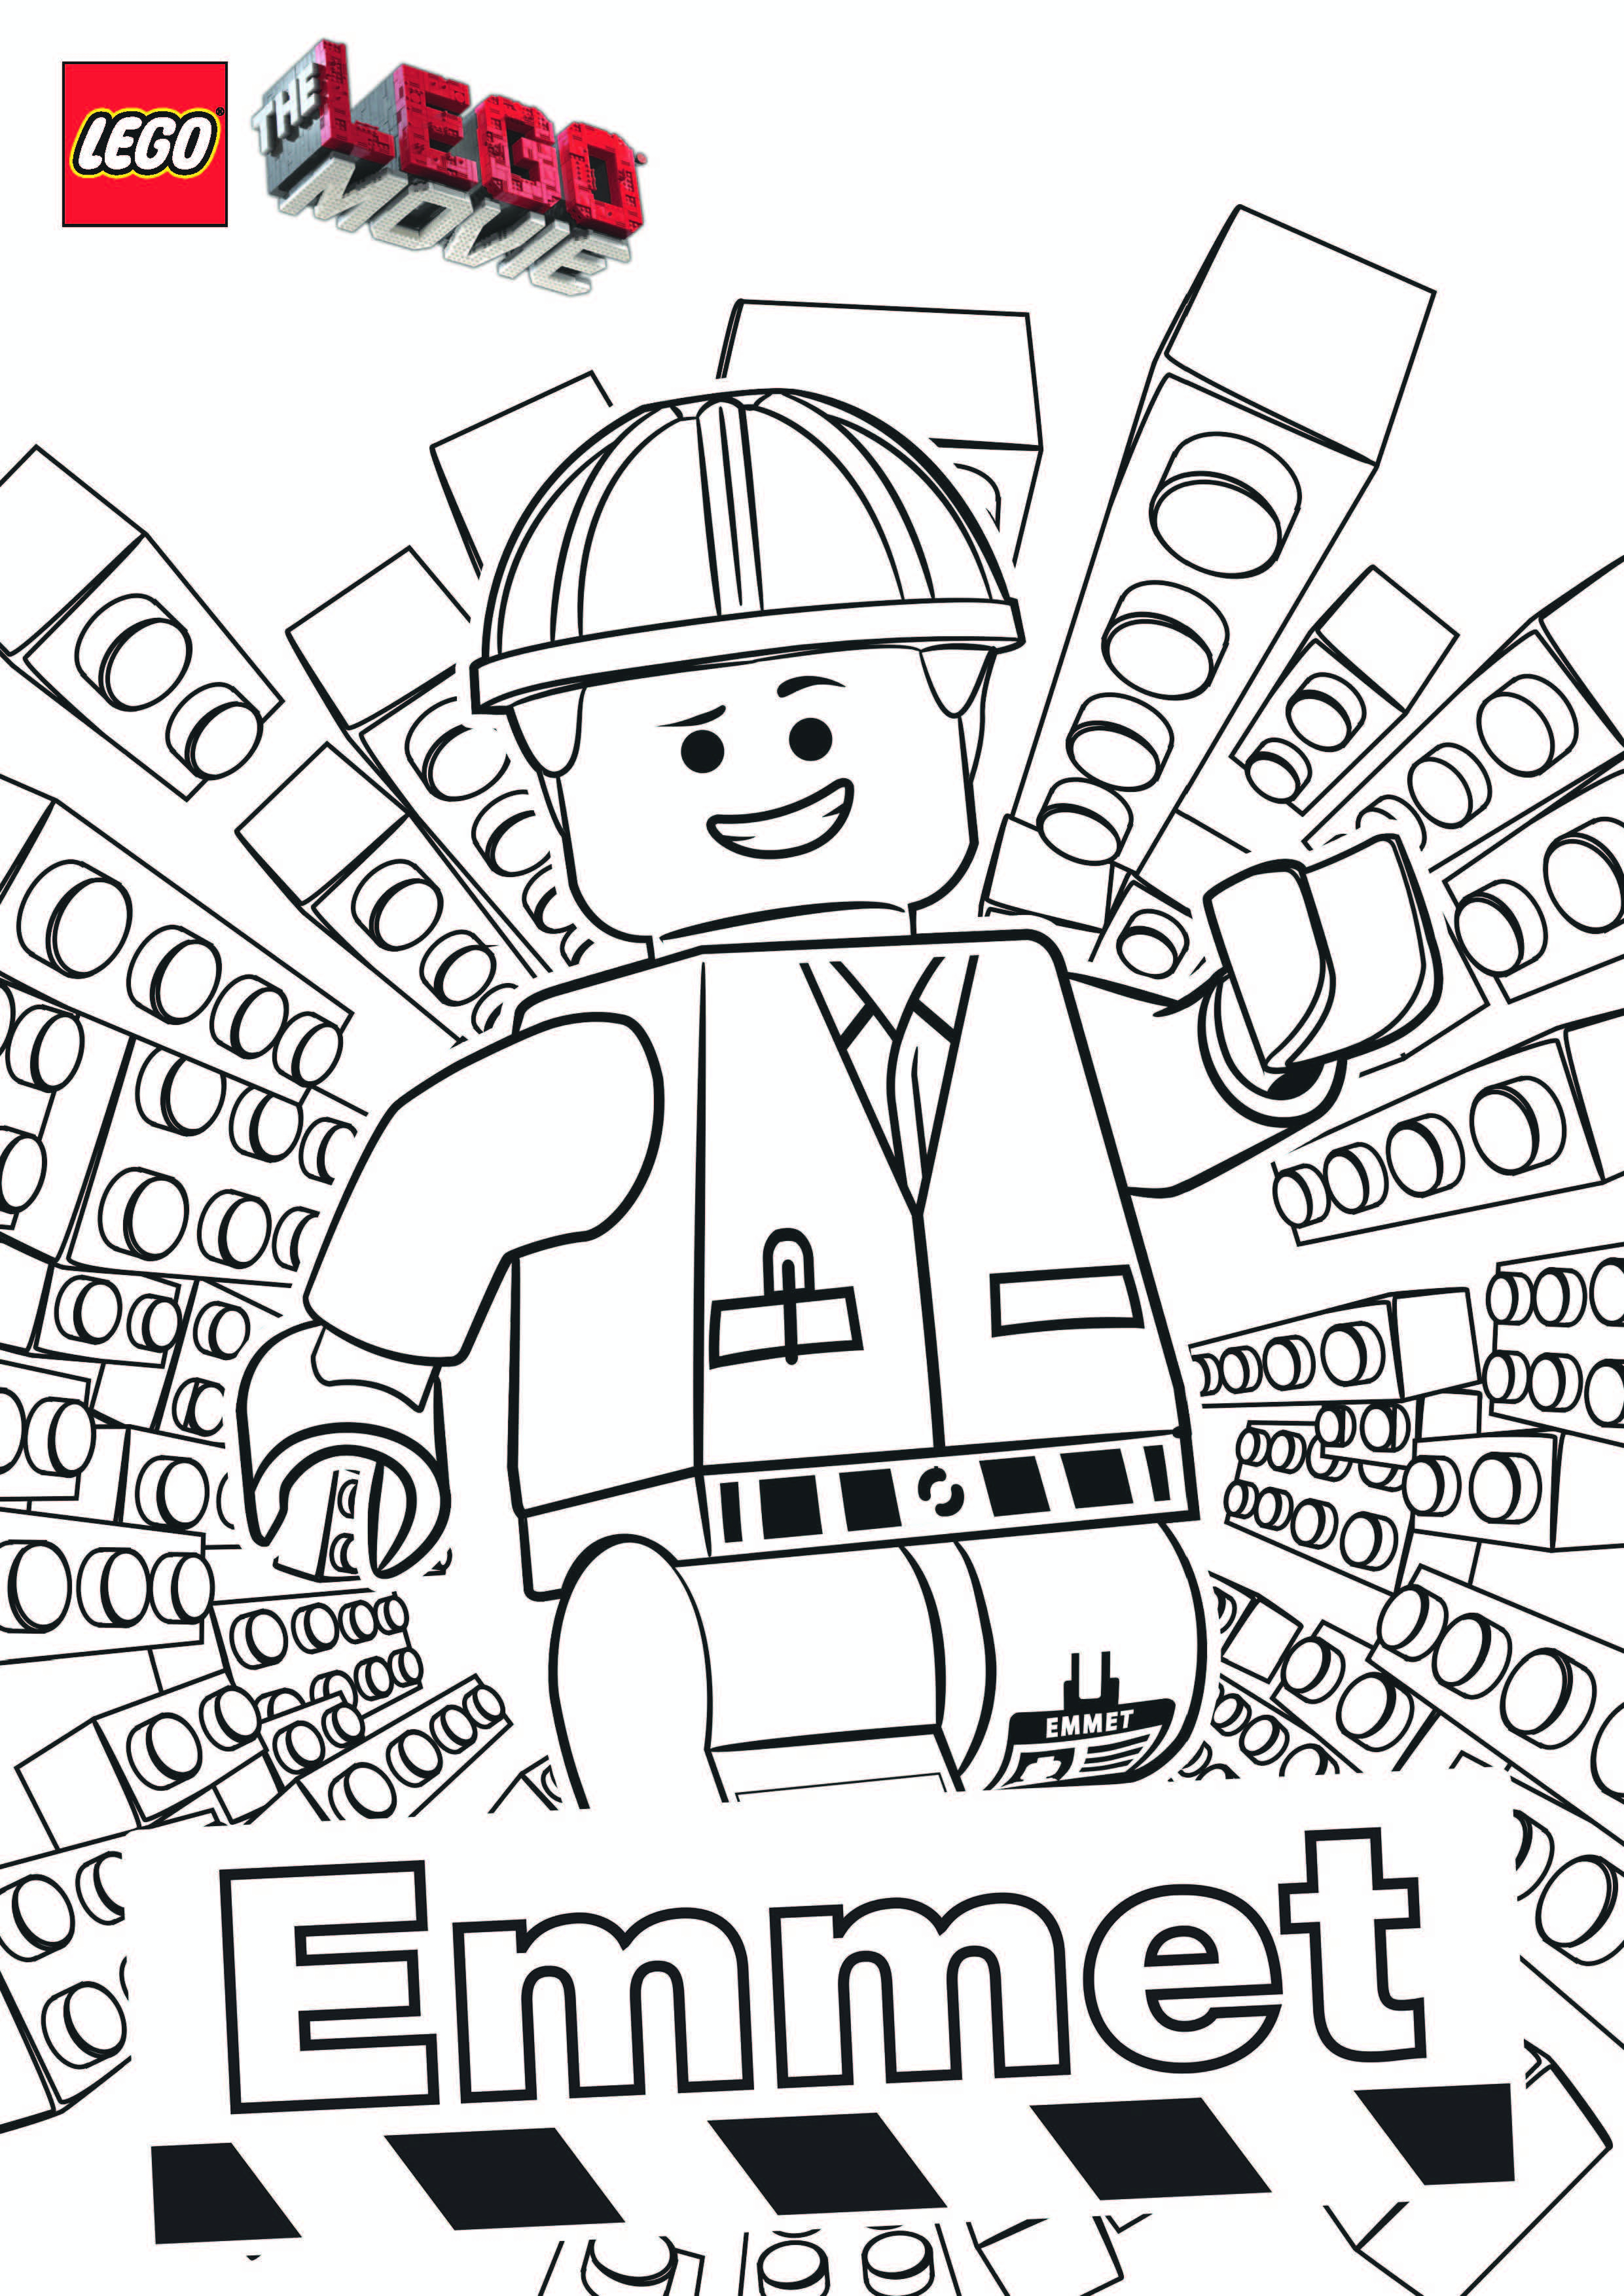 Lego Movie Color Pages Free Lego Movie Coloring Pages At Getdrawings Free For